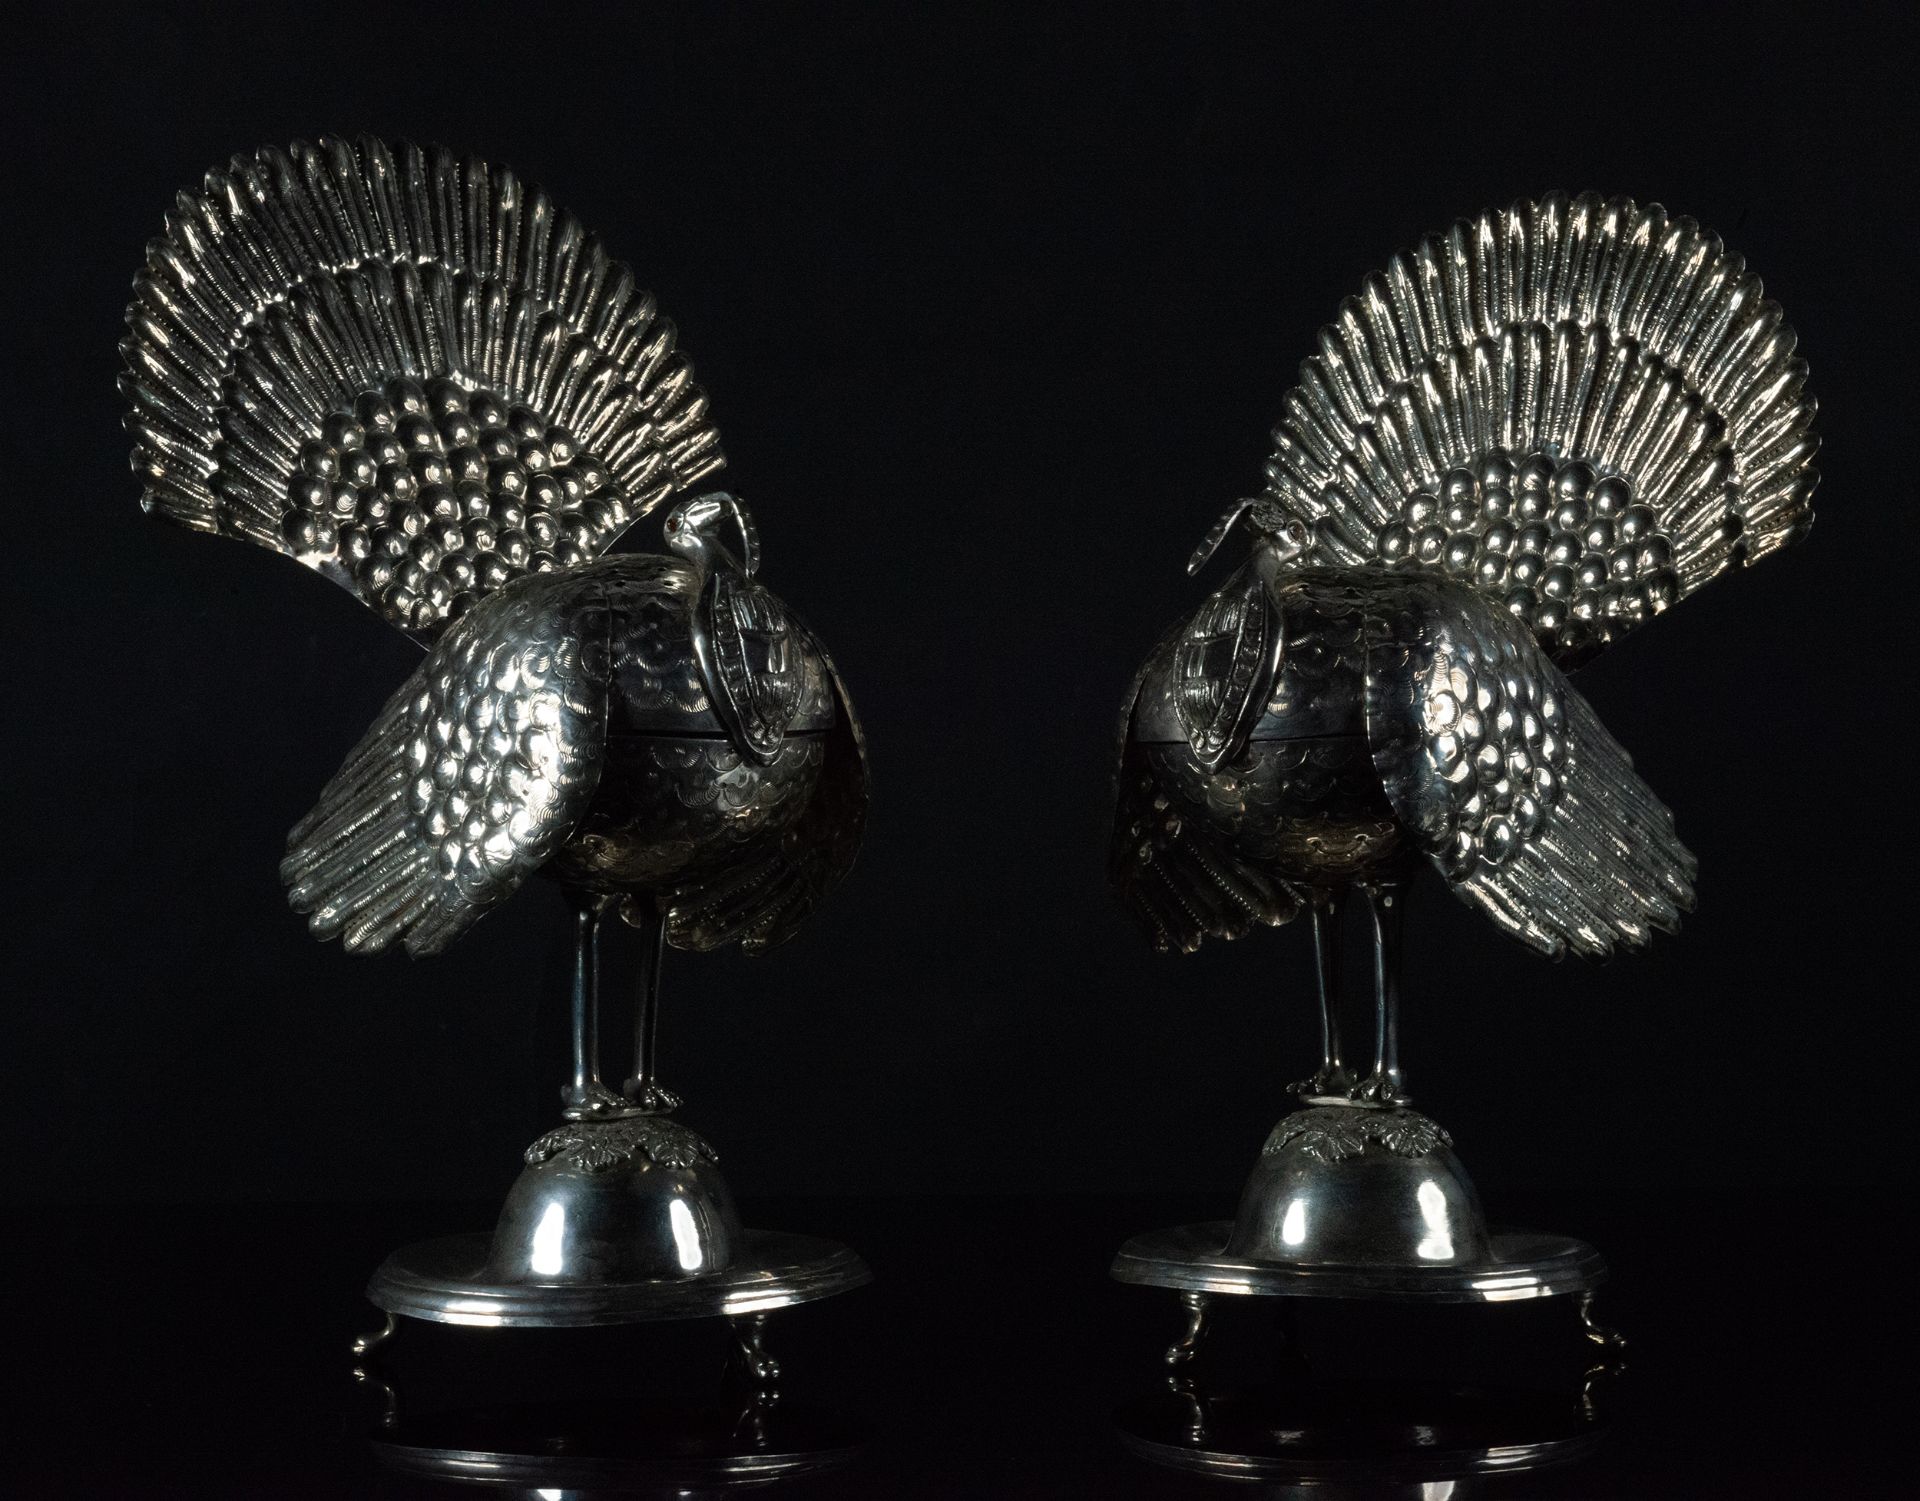 Pair of Peacock incense burners, colonial work, end of the 18th century
